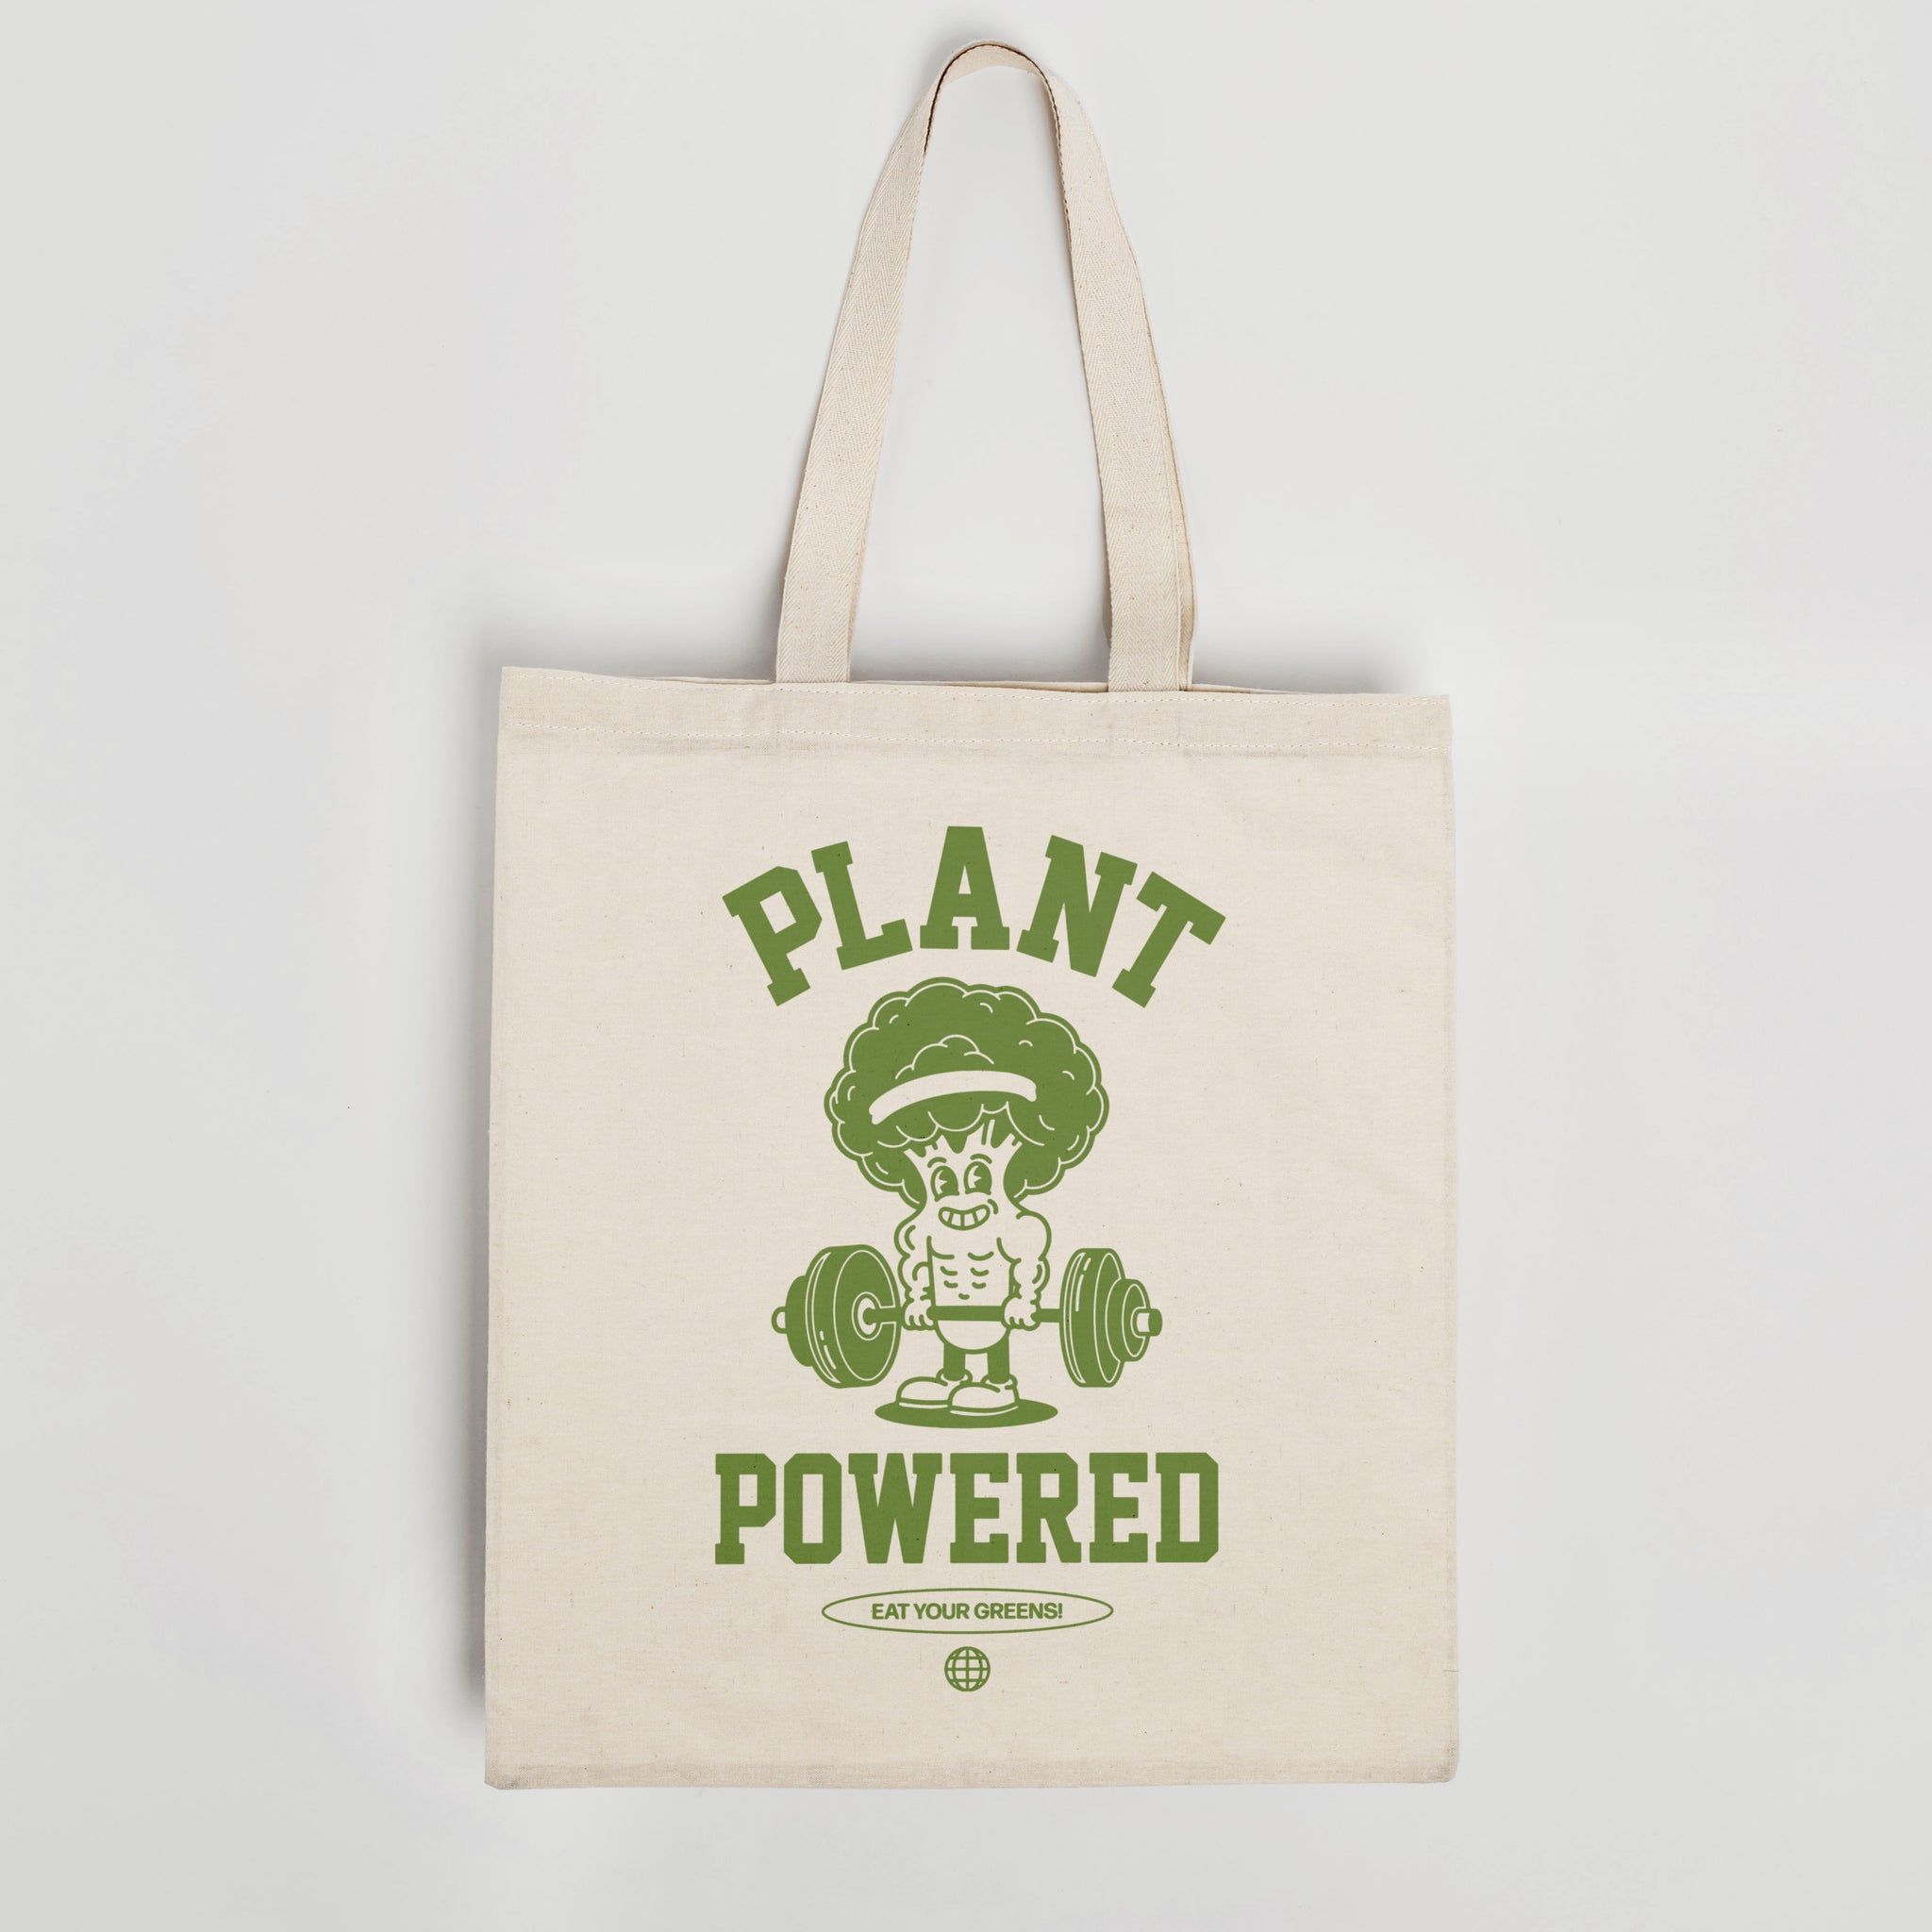 'Plant Powered' organic cotton canvas tote bag